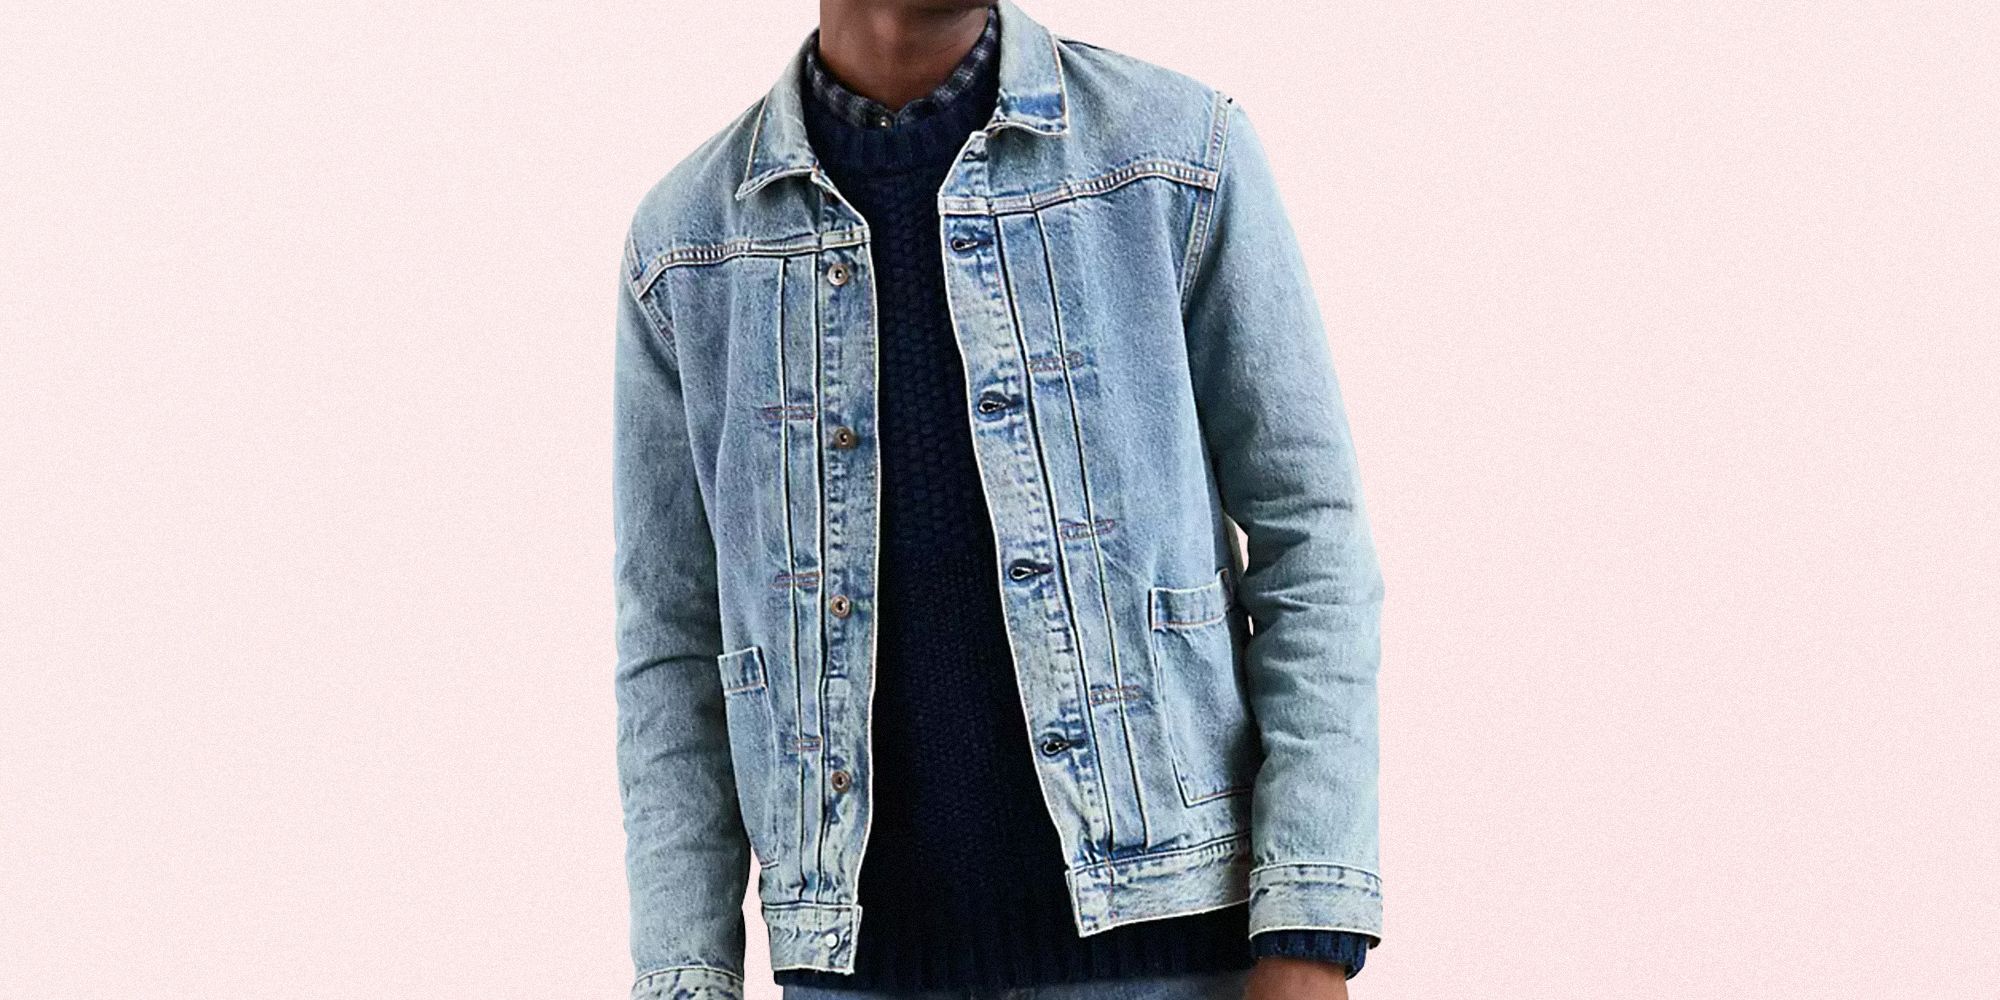 The Massive Levi's Warehouse Sale Is Back. Here's What to Buy